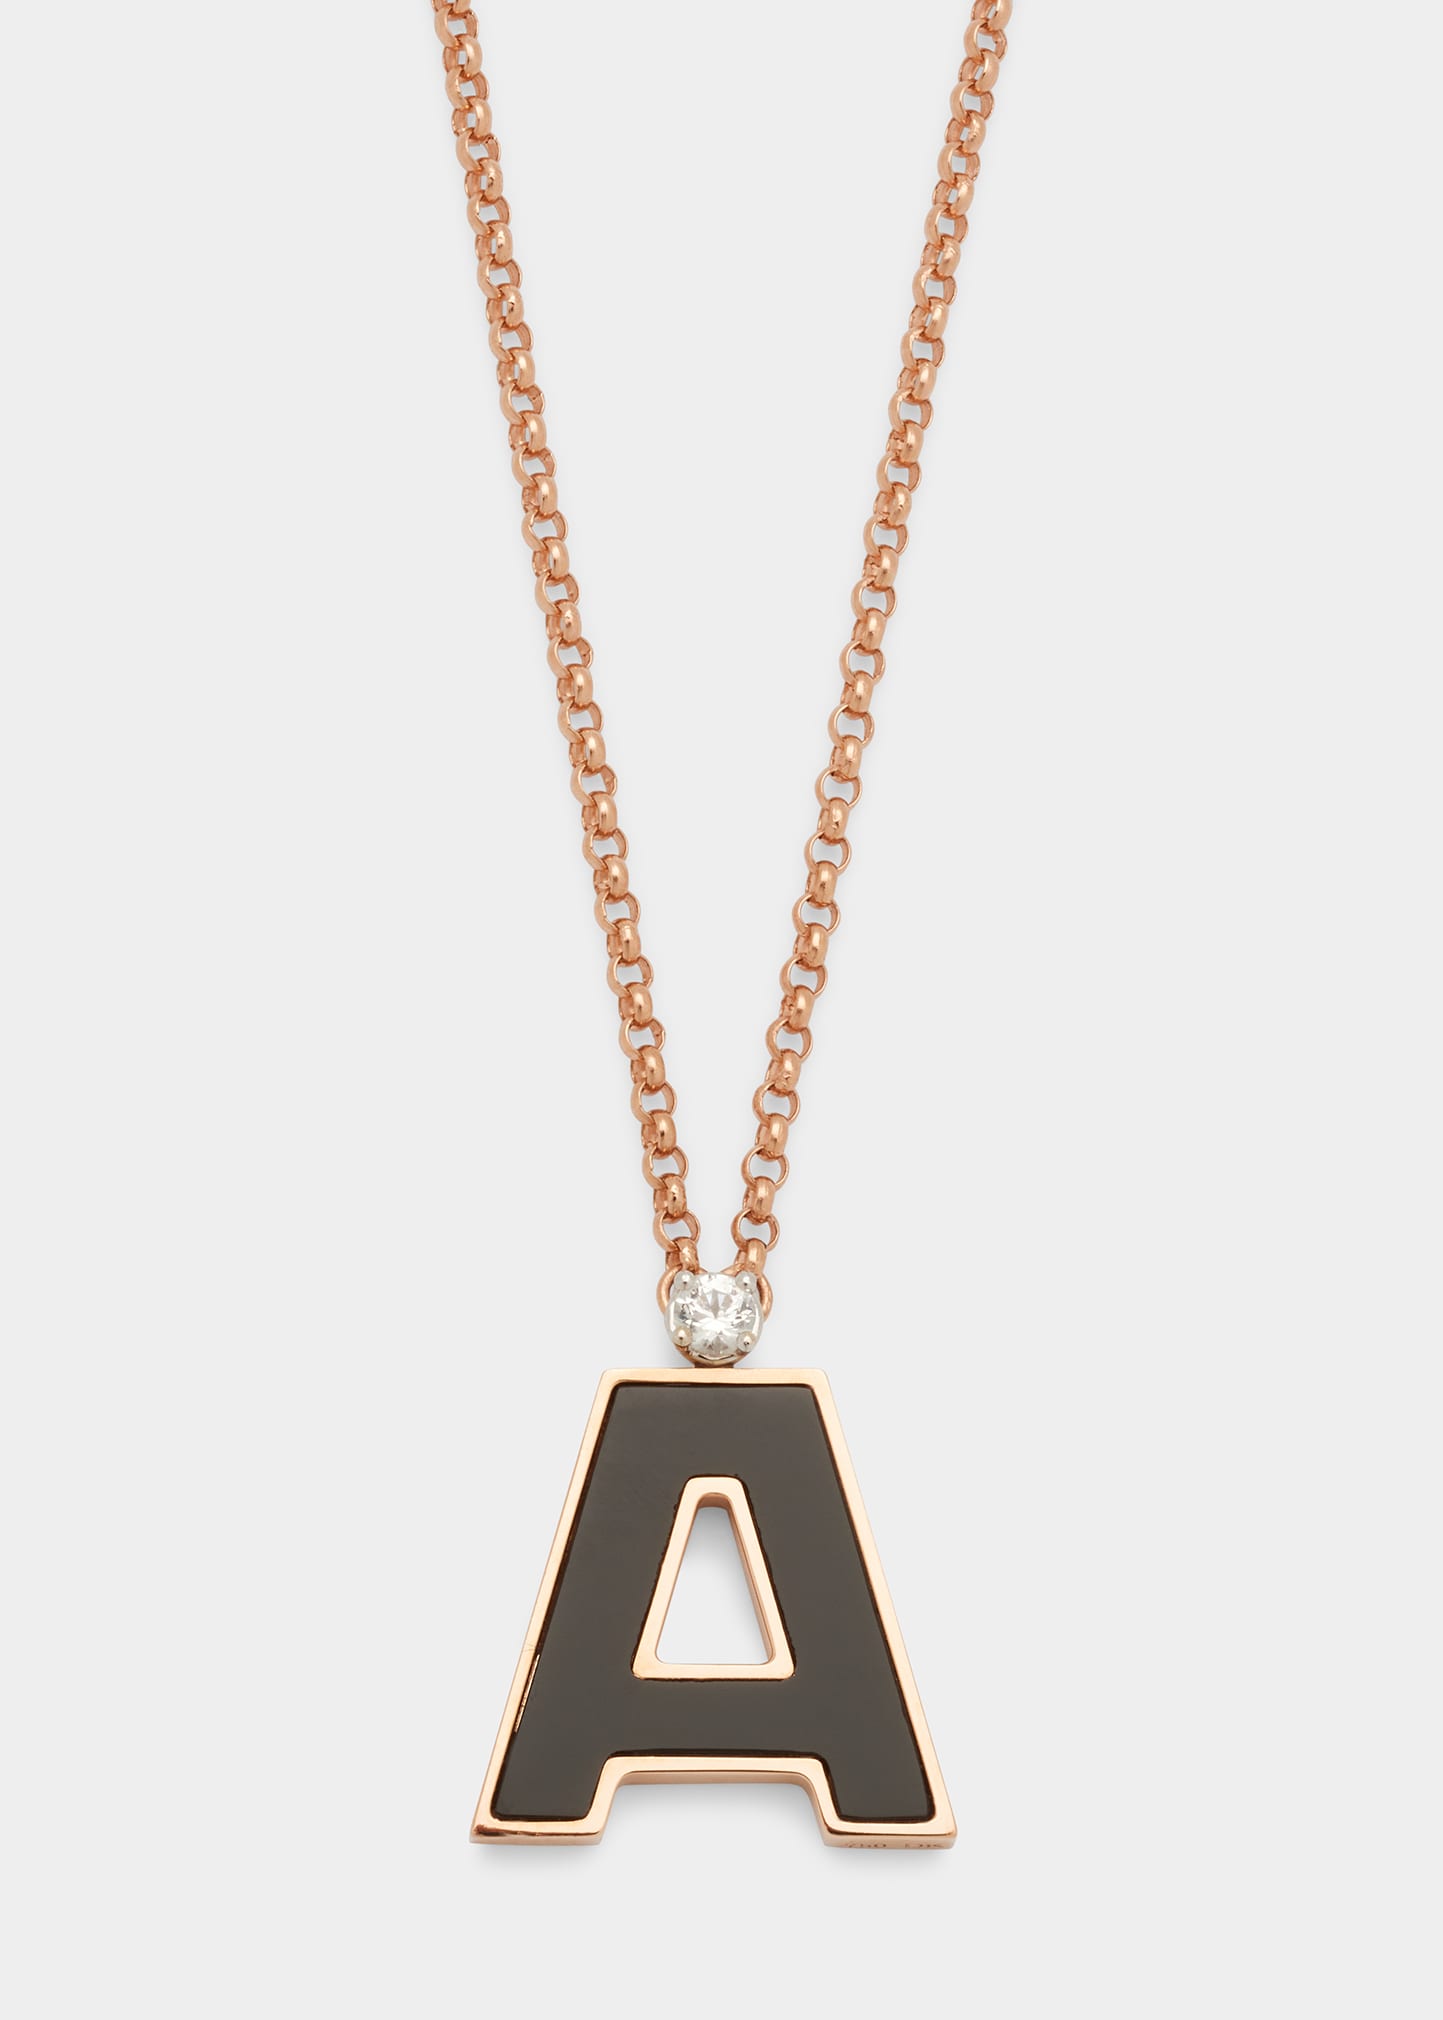 Rose Gold 'A' Letter Charm Necklace with Onyx and White Sapphire